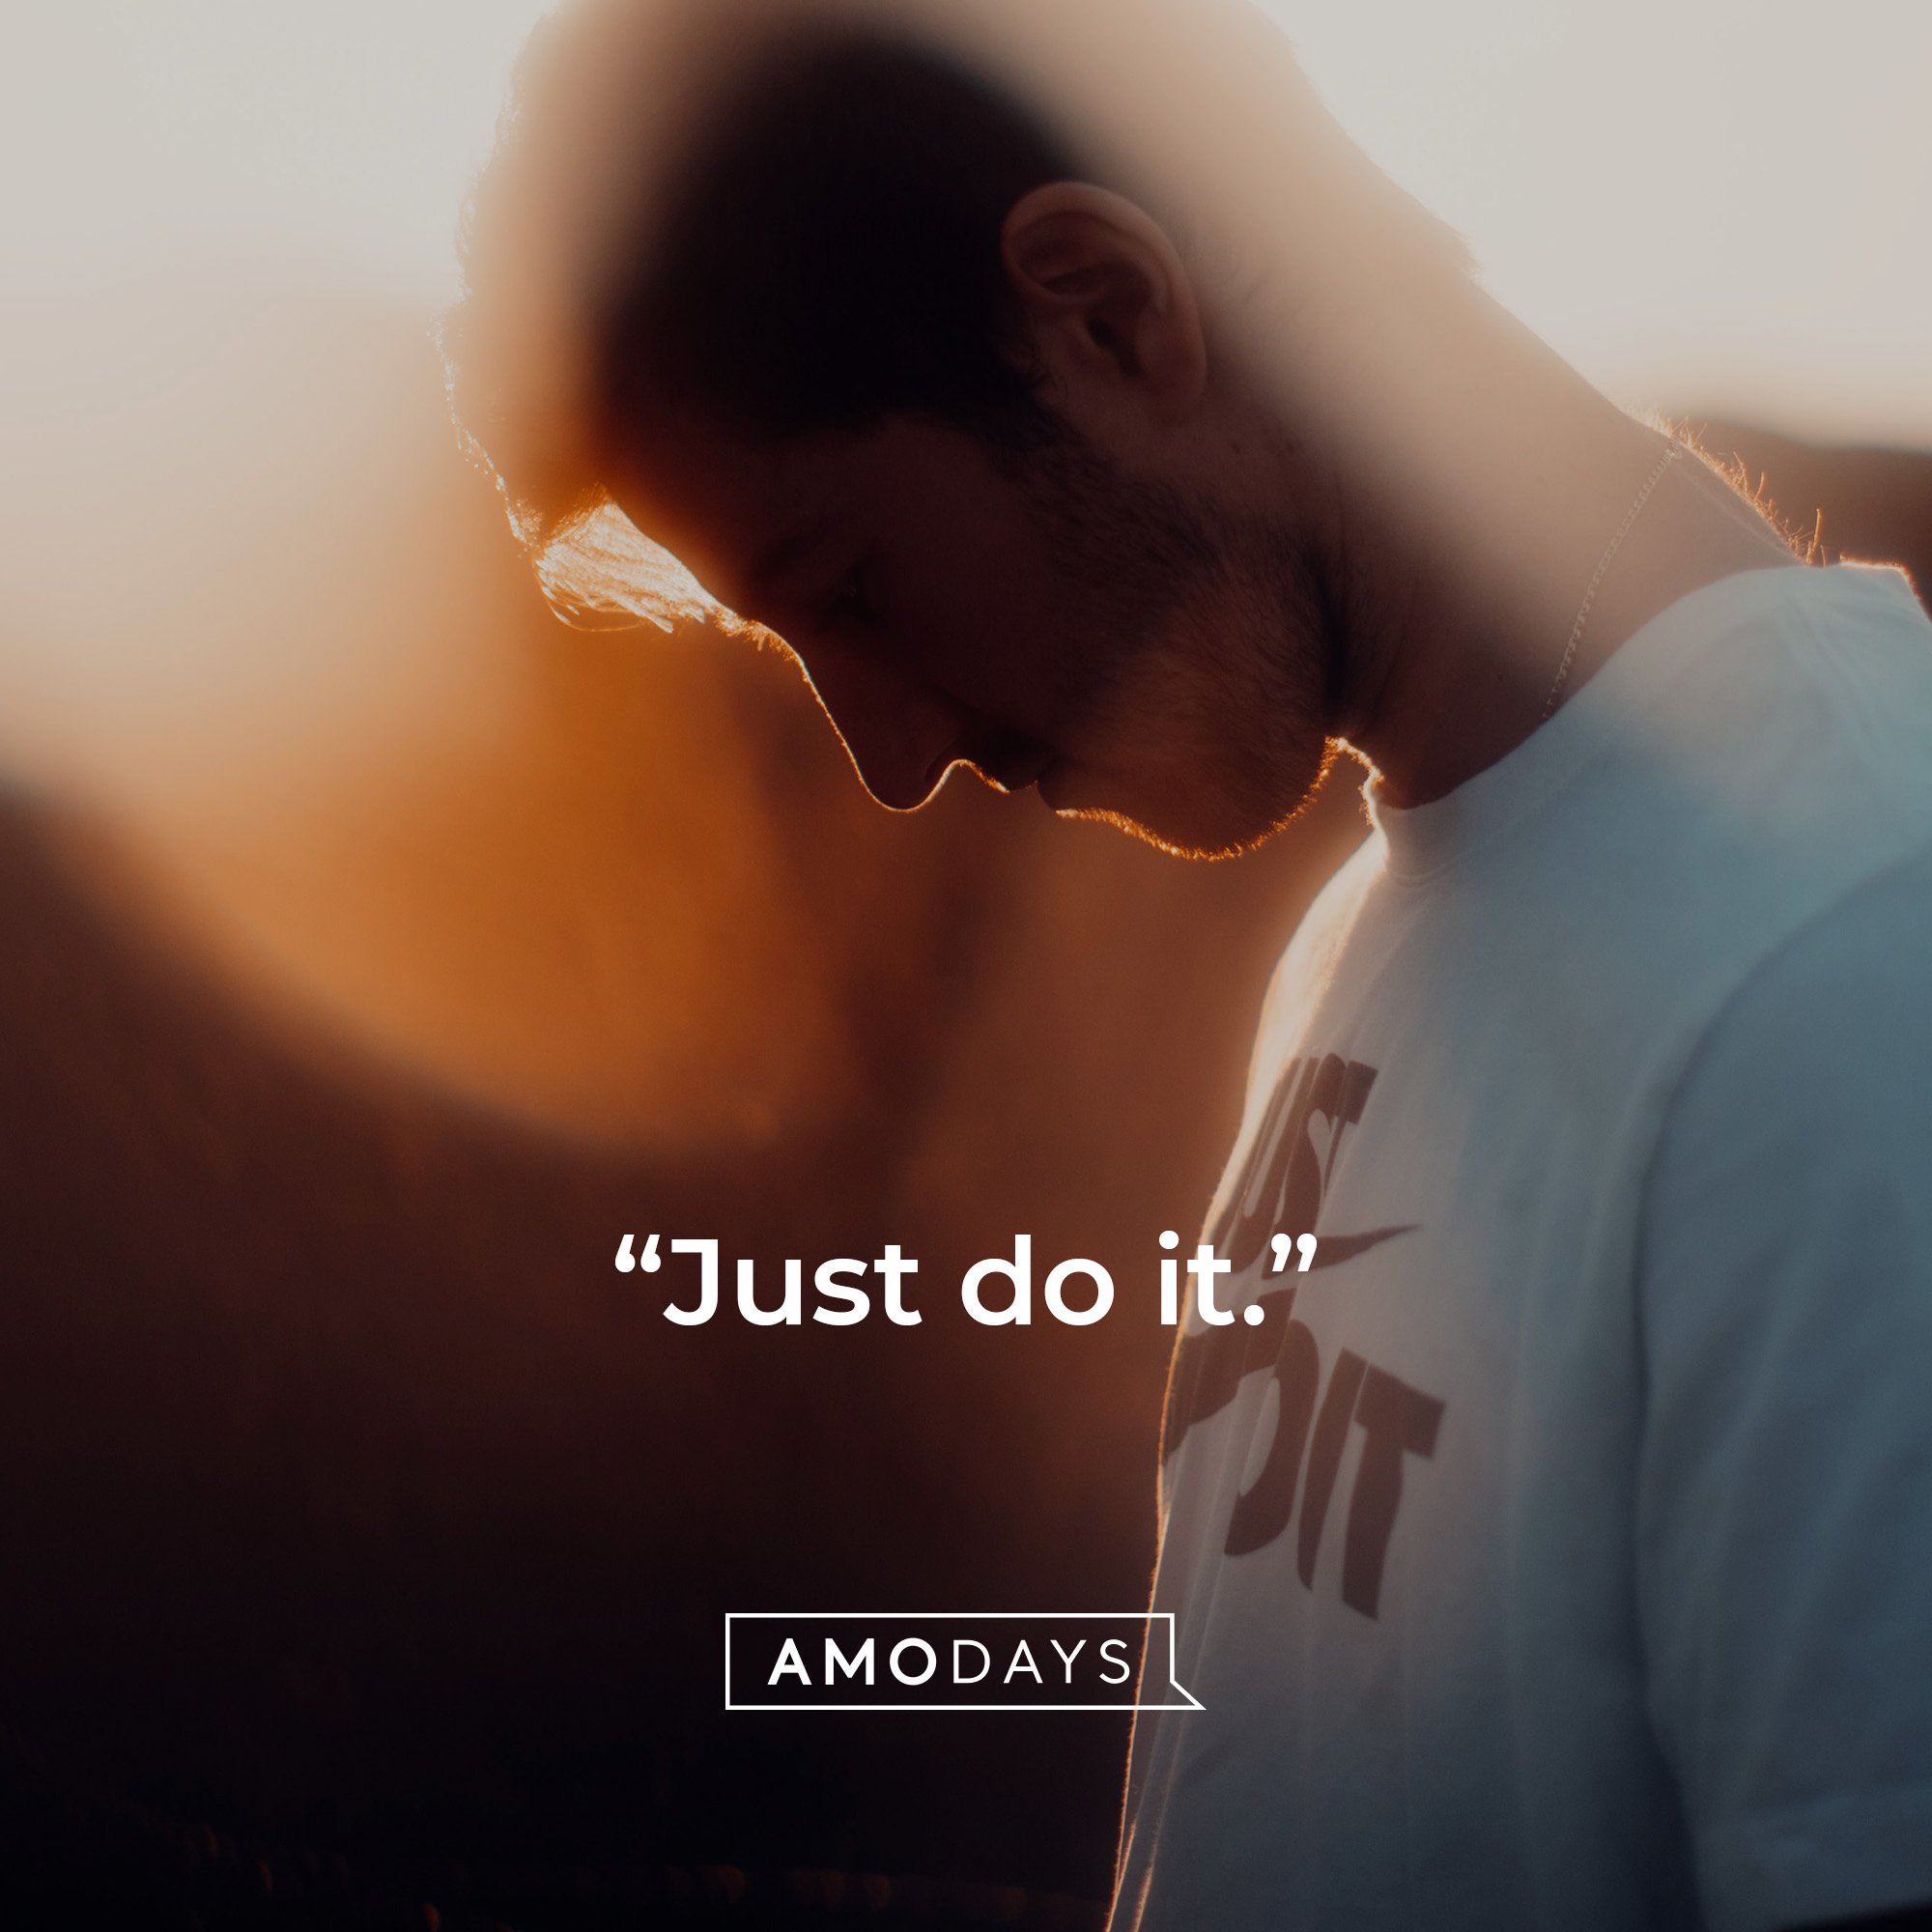 Nike’s quote: “Just do it.” | Source: AmoDays